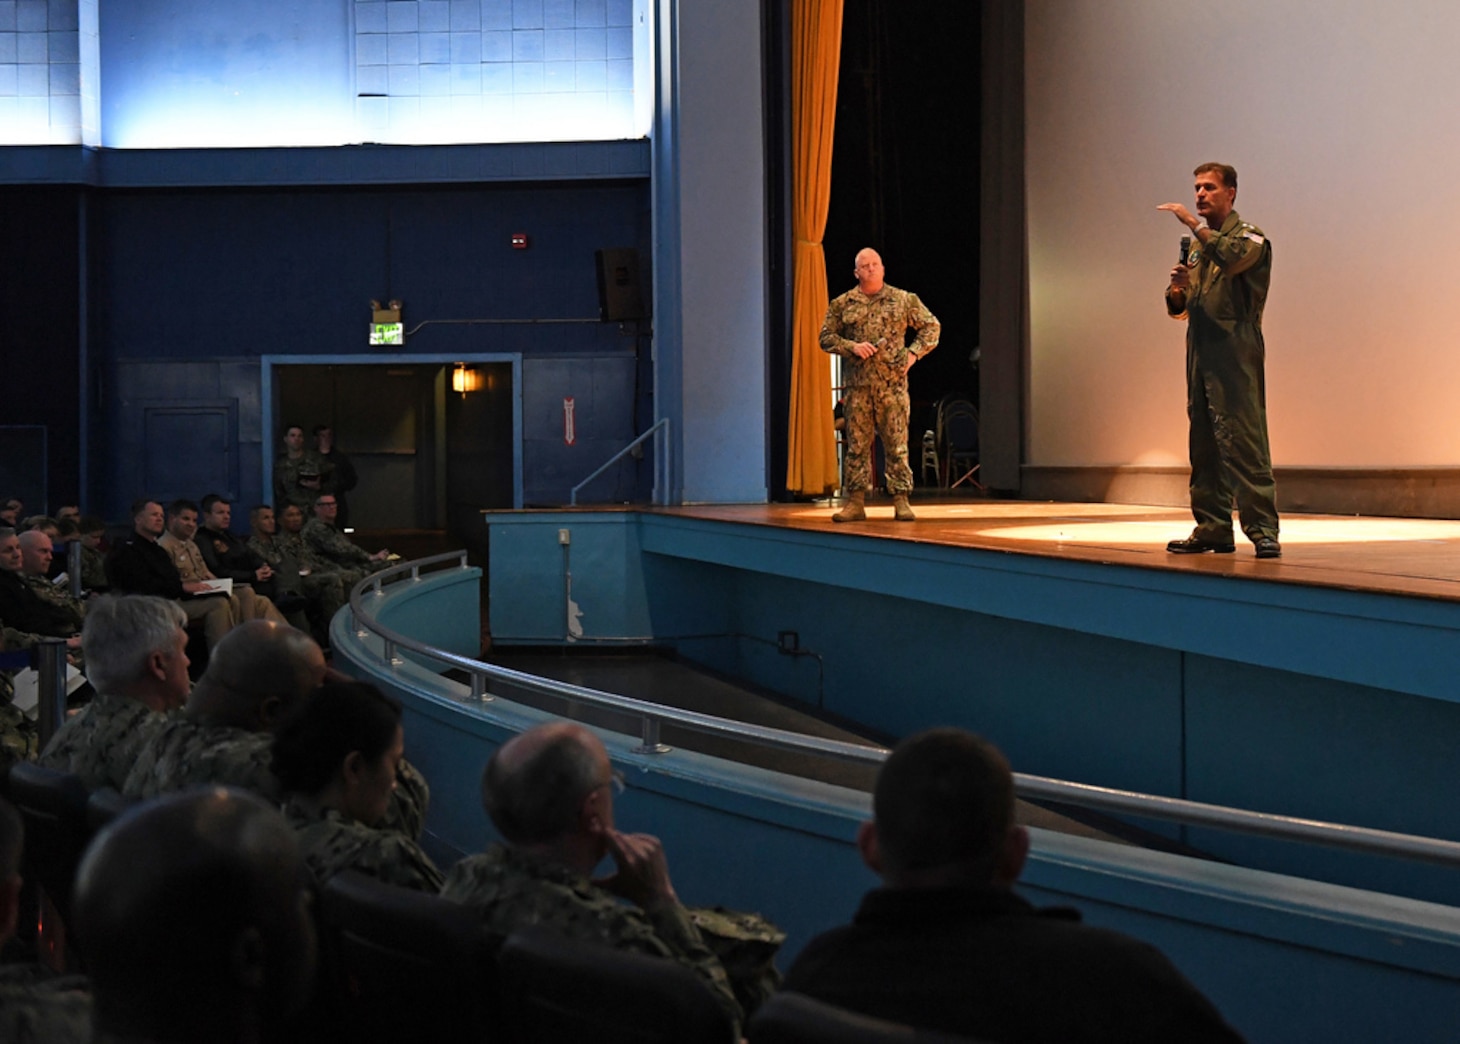 (March 11, 2019) Adm. John Aquilino, commander of U.S. Pacific Fleet, speaks with leaders from area San Diego-based commands at the Naval Air Station North Island's Lowry Base Theater. During his visit to San Diego, Aquilino shared information about fleetwide efforts to restore unit readiness and sought feedback from unit commanders on those efforts.